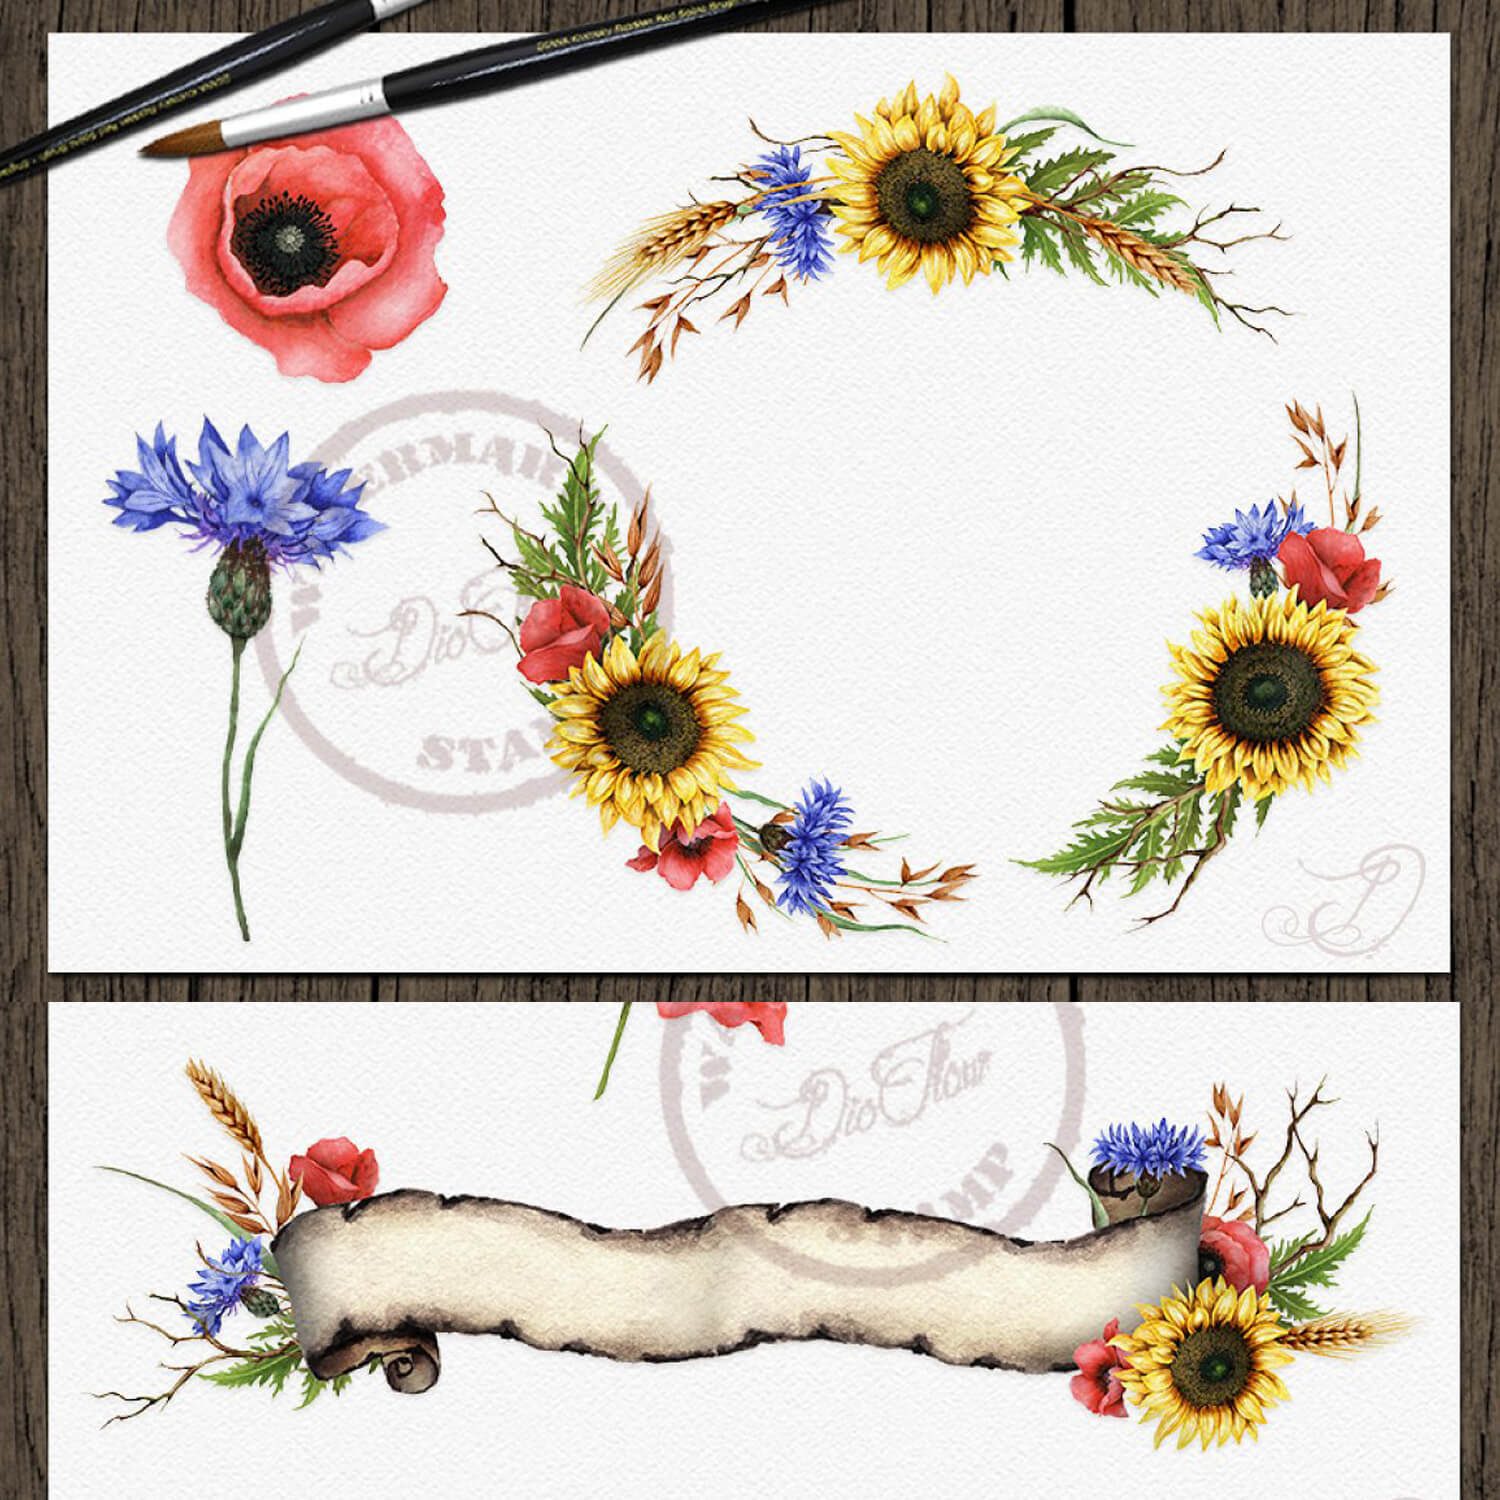 Illustrations with wreaths of sunflowers, poppies and greenery on a farm.